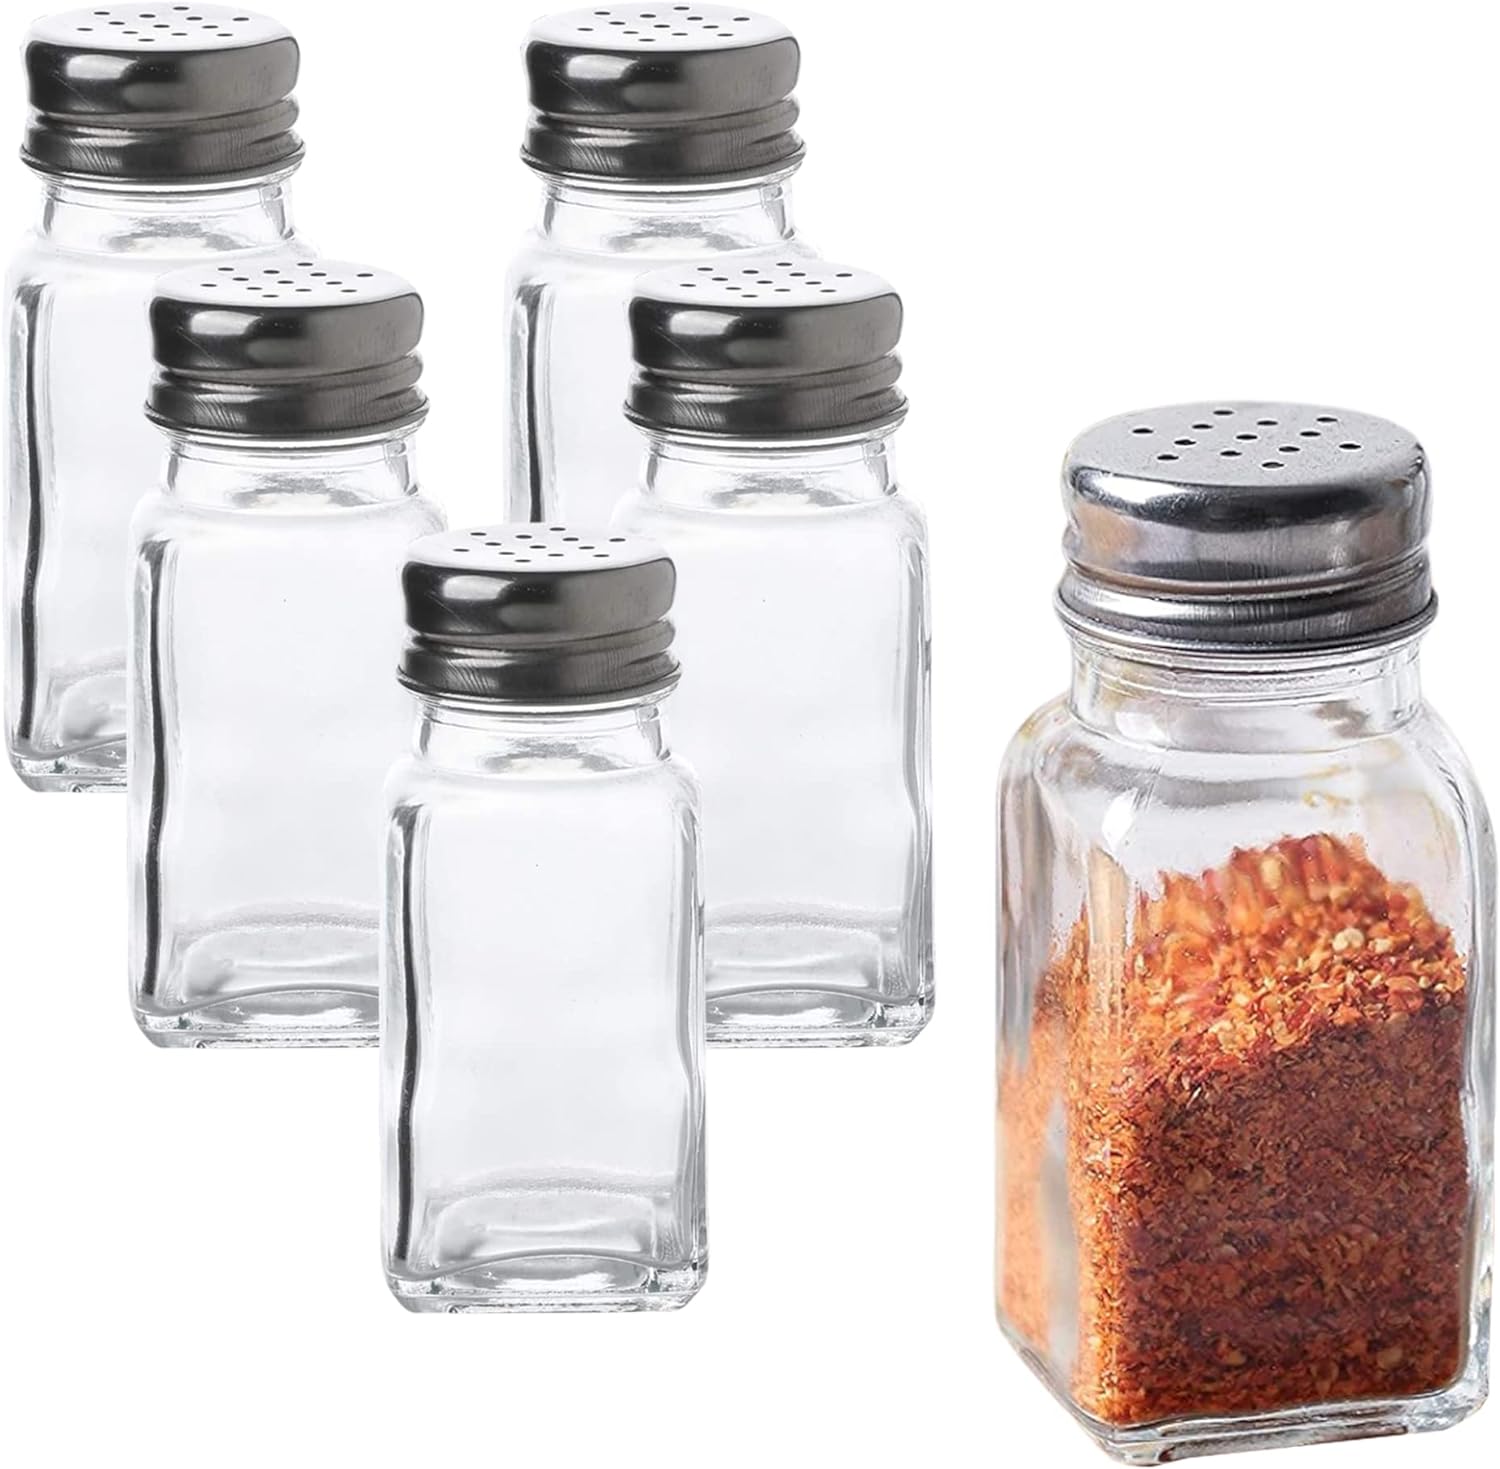 WHOLE HOUSEWARES | stainless steel salt and pepper shakers set | 6-Piece Pack | Best for Home Kitchen, Restaurants and Catering